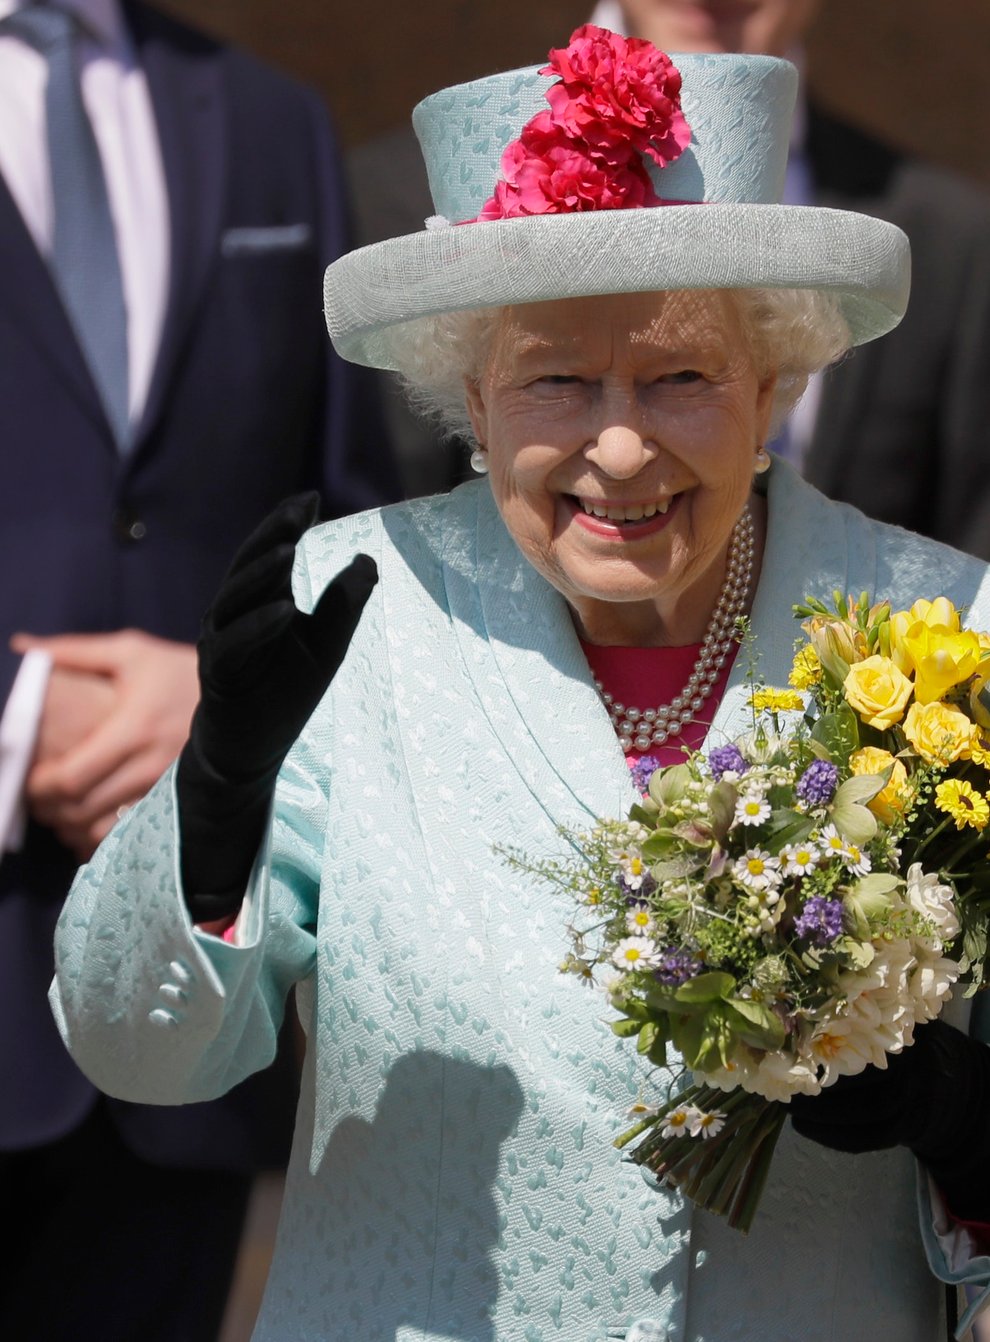 The Queen attending last year's Easter Sunday service at Windsor Castle in 2019 (PA Images)